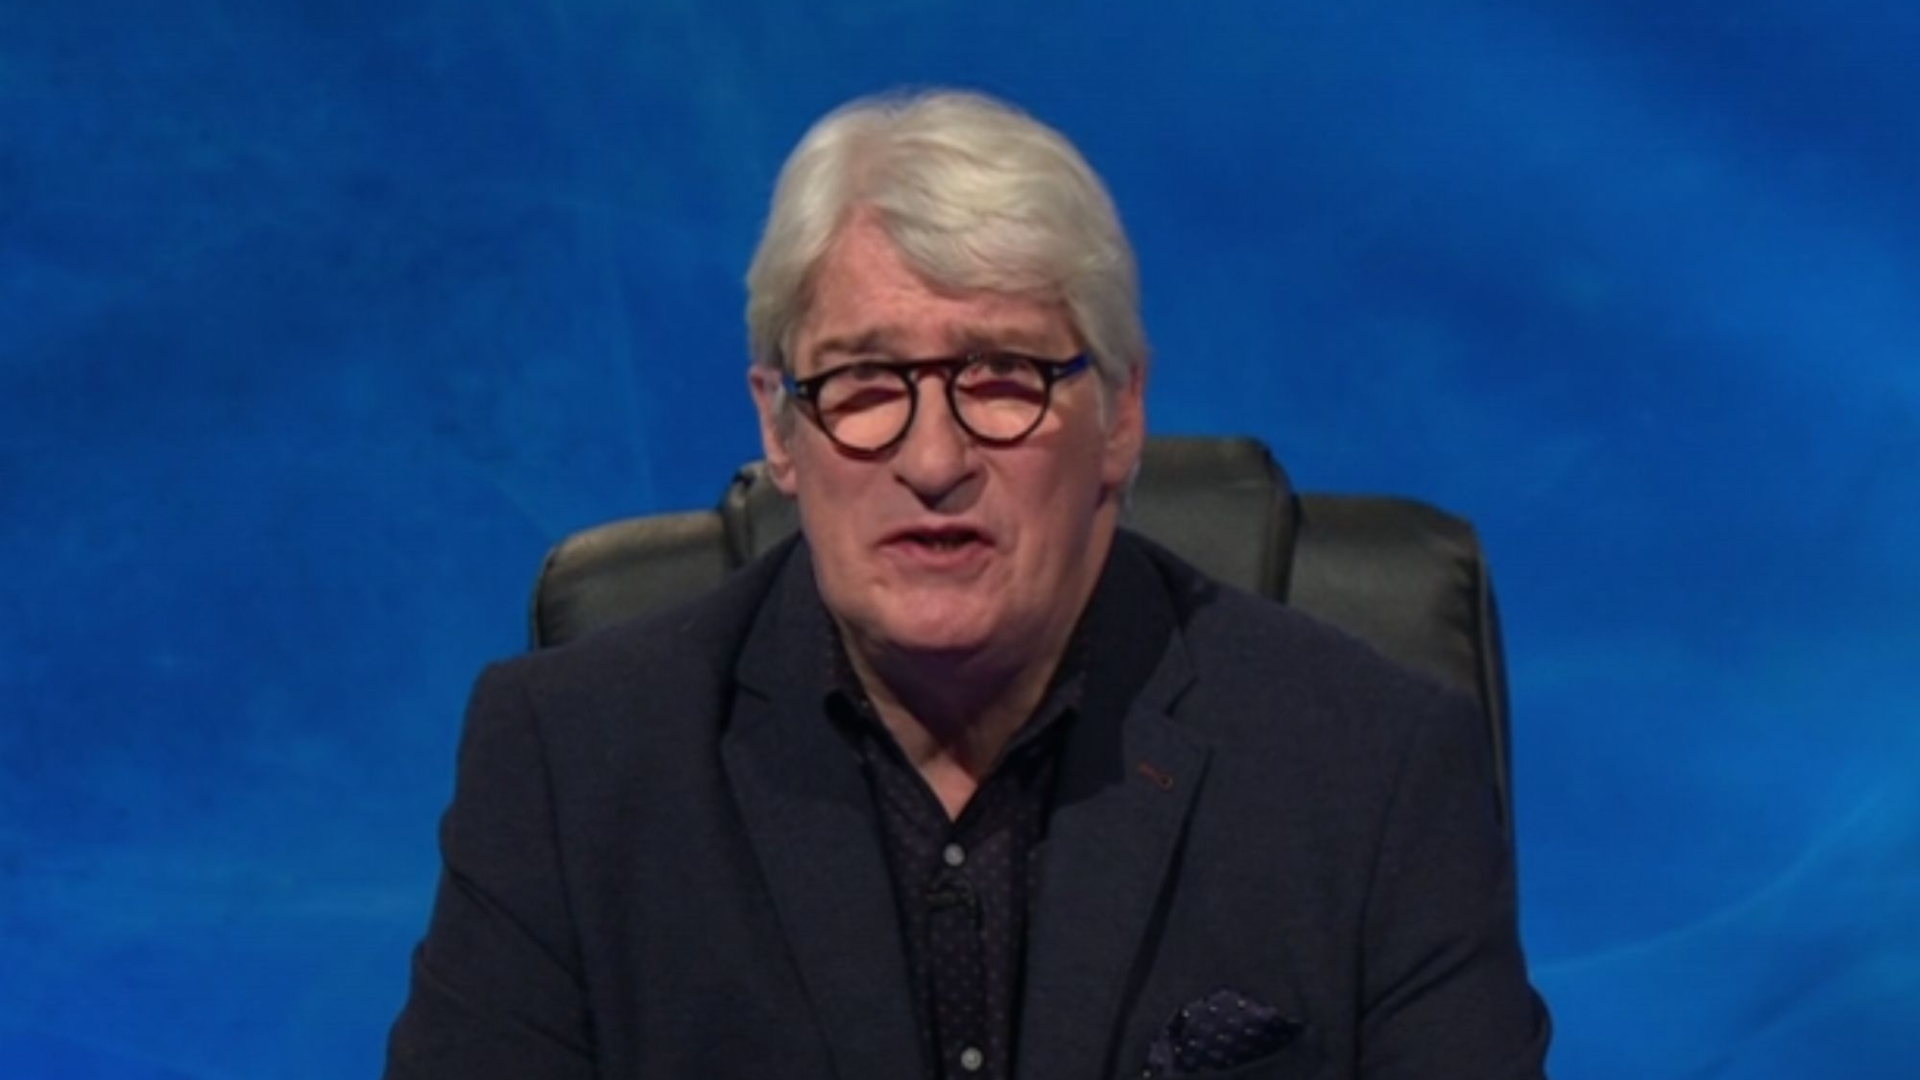 University Challenge viewers cry when Jeremy Paxman announces the end of his 30-year-long show